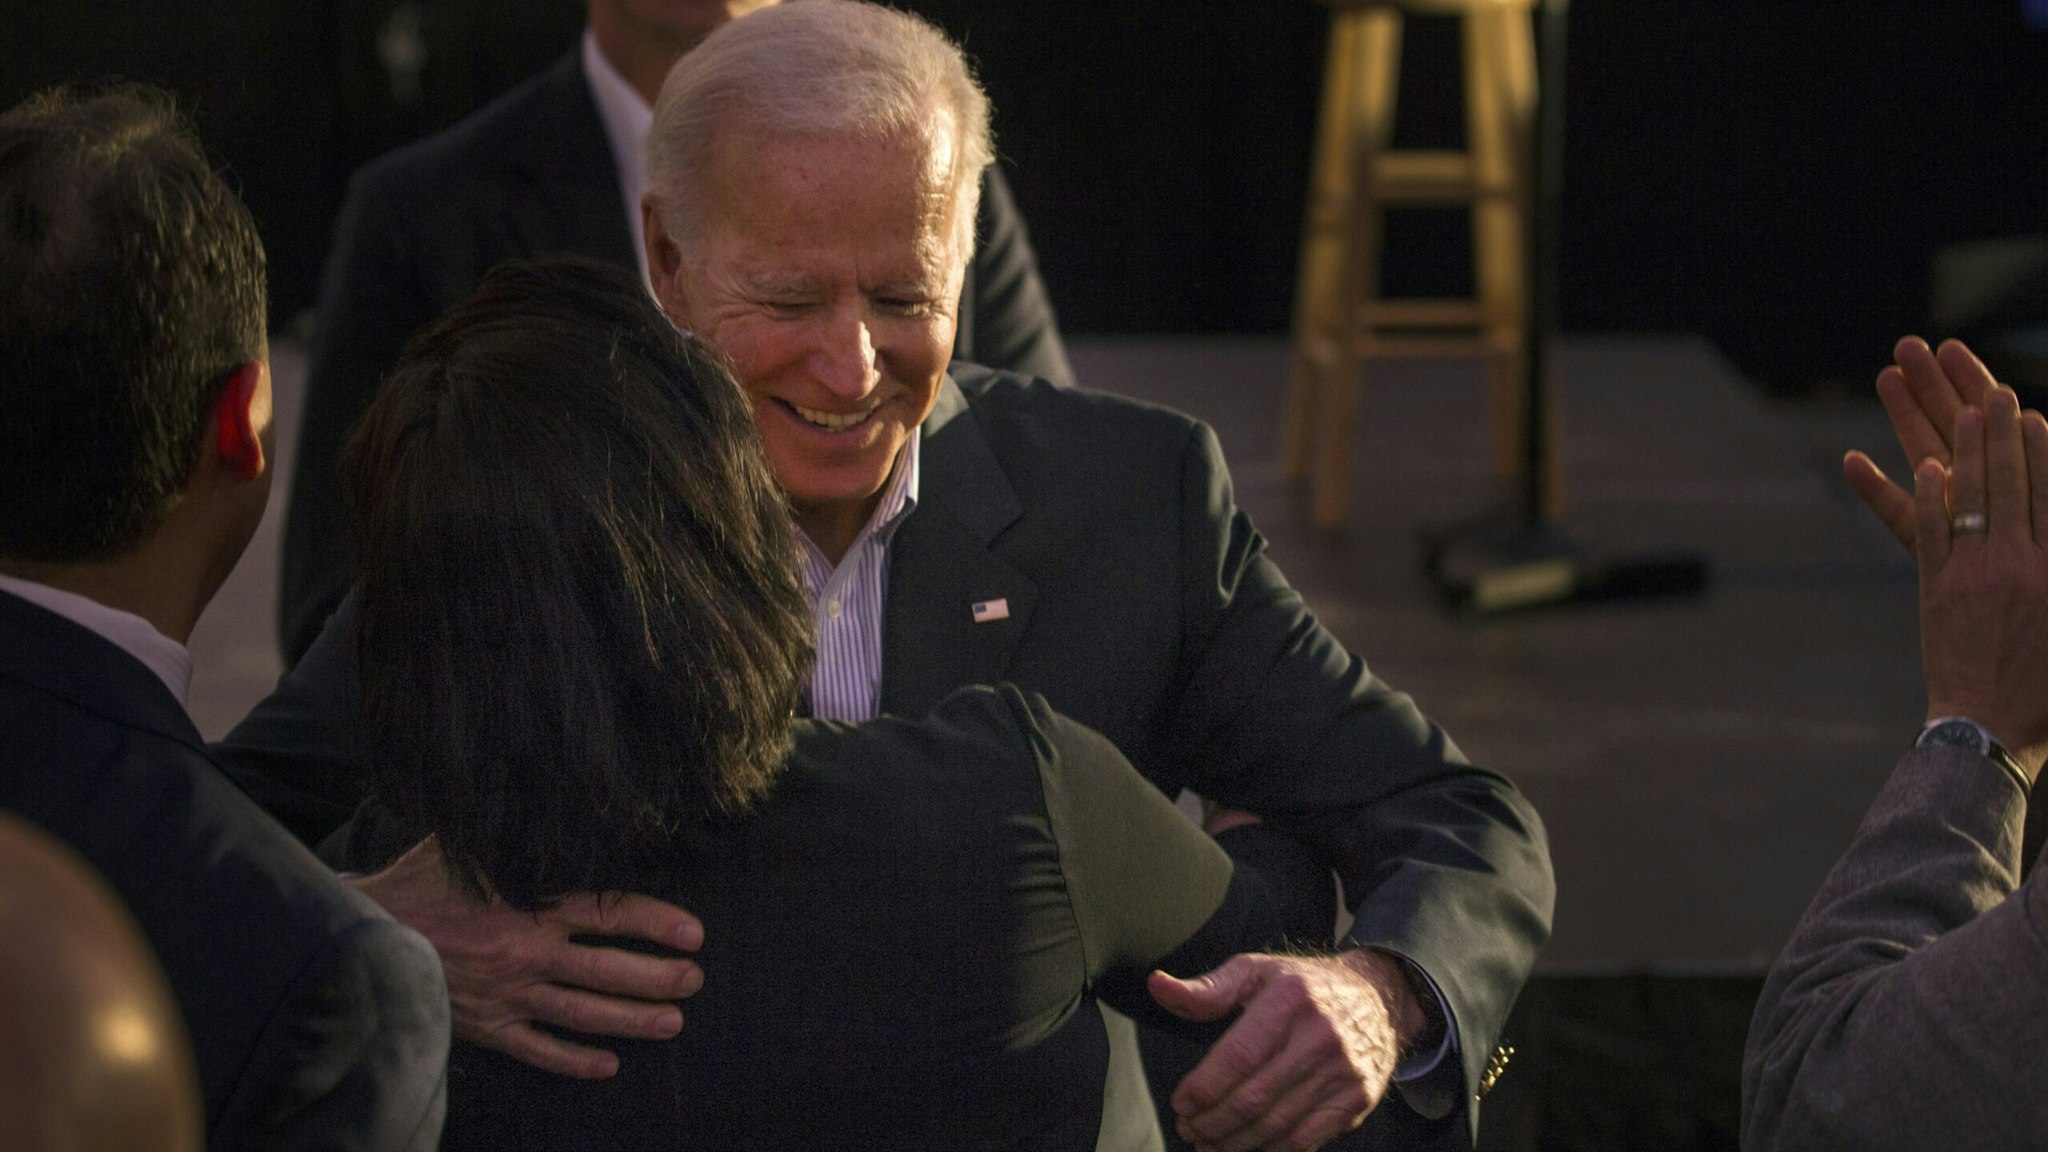 SAN ANTONIO, TX - DECEMBER 13: Democratic presidential candidate and former U.S. Vice President Joe Biden hugs a woman after at a community event while campaigning on December 13, 2019 in San Antonio, Texas. Texas will hold its Democratic primary on March 3, 2020, also known as Super Tuesday. (Photo by Daniel Carde/Getty Images)